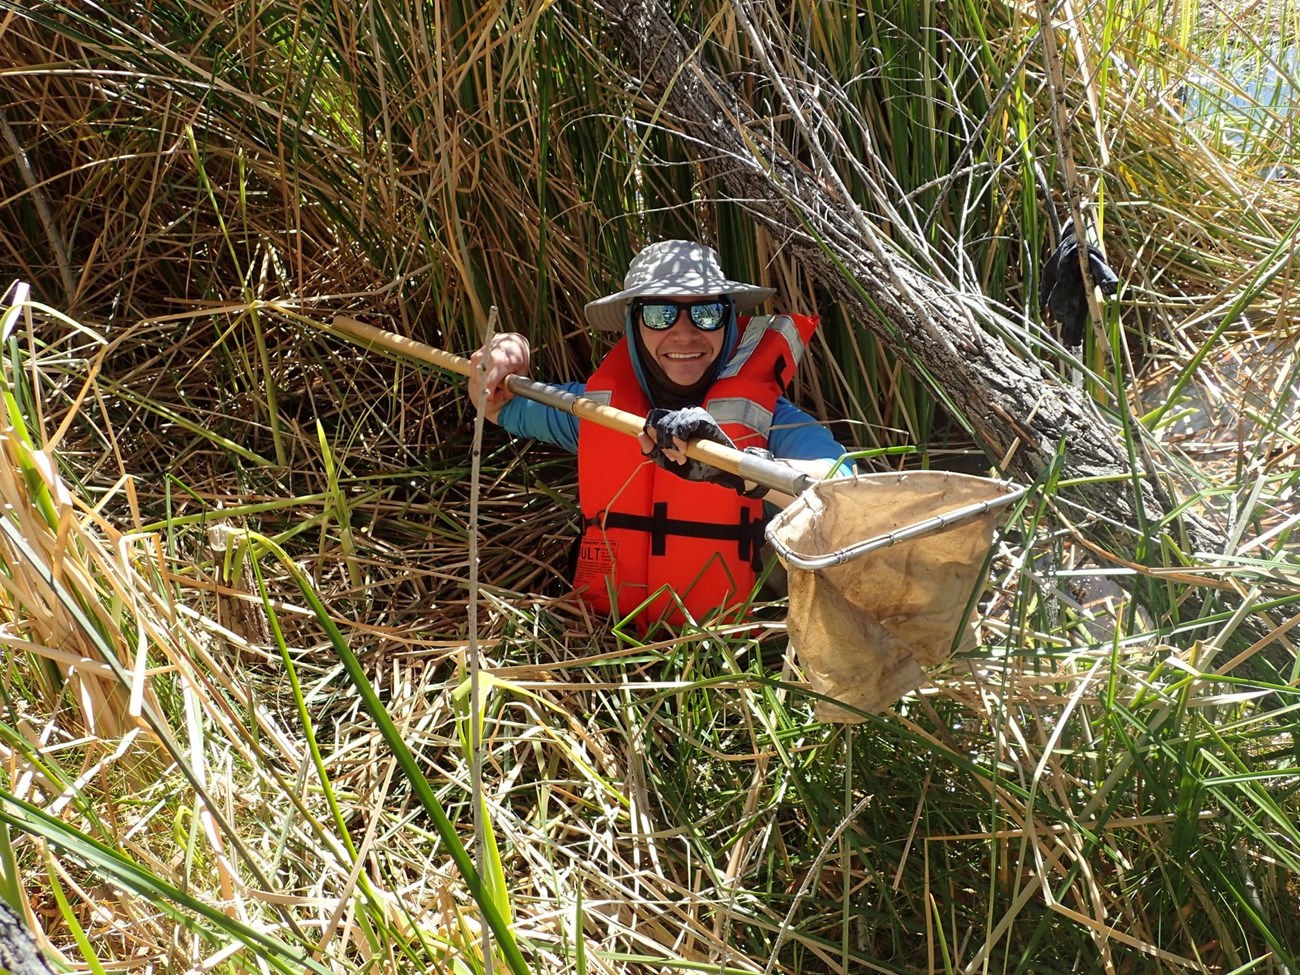 Man wearing hat to screen the sun and a life vest stands waist-deep in water, surrounged by wetland plants and holding the handle of a net for sampling aquatic invertebrates.